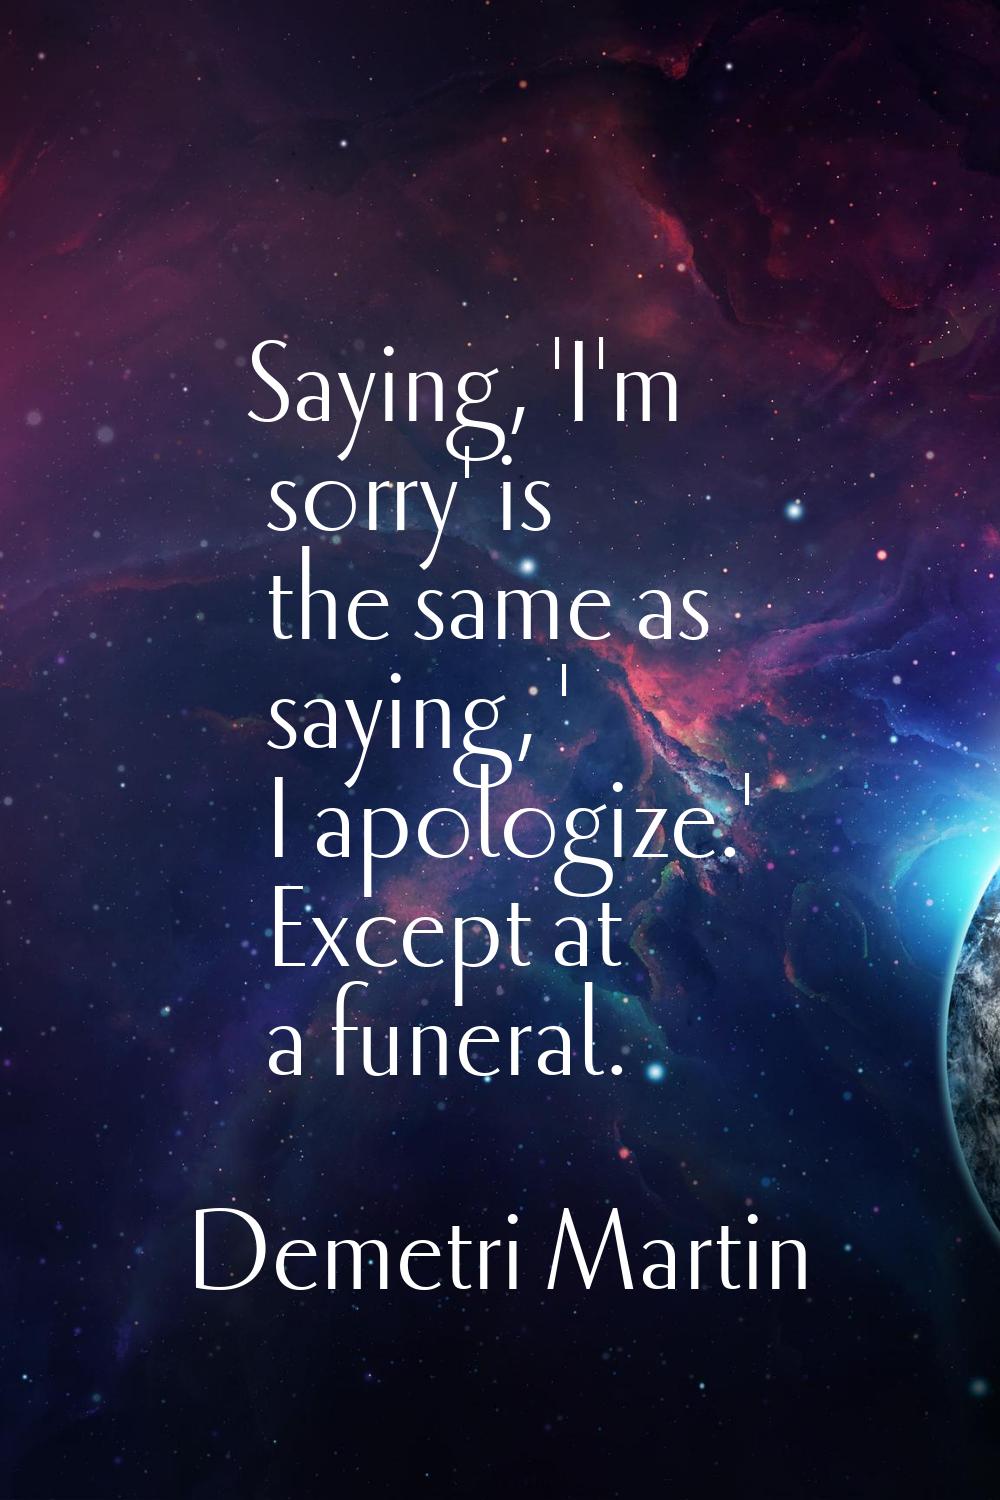 Saying, 'I'm sorry' is the same as saying, ' I apologize.' Except at a funeral.